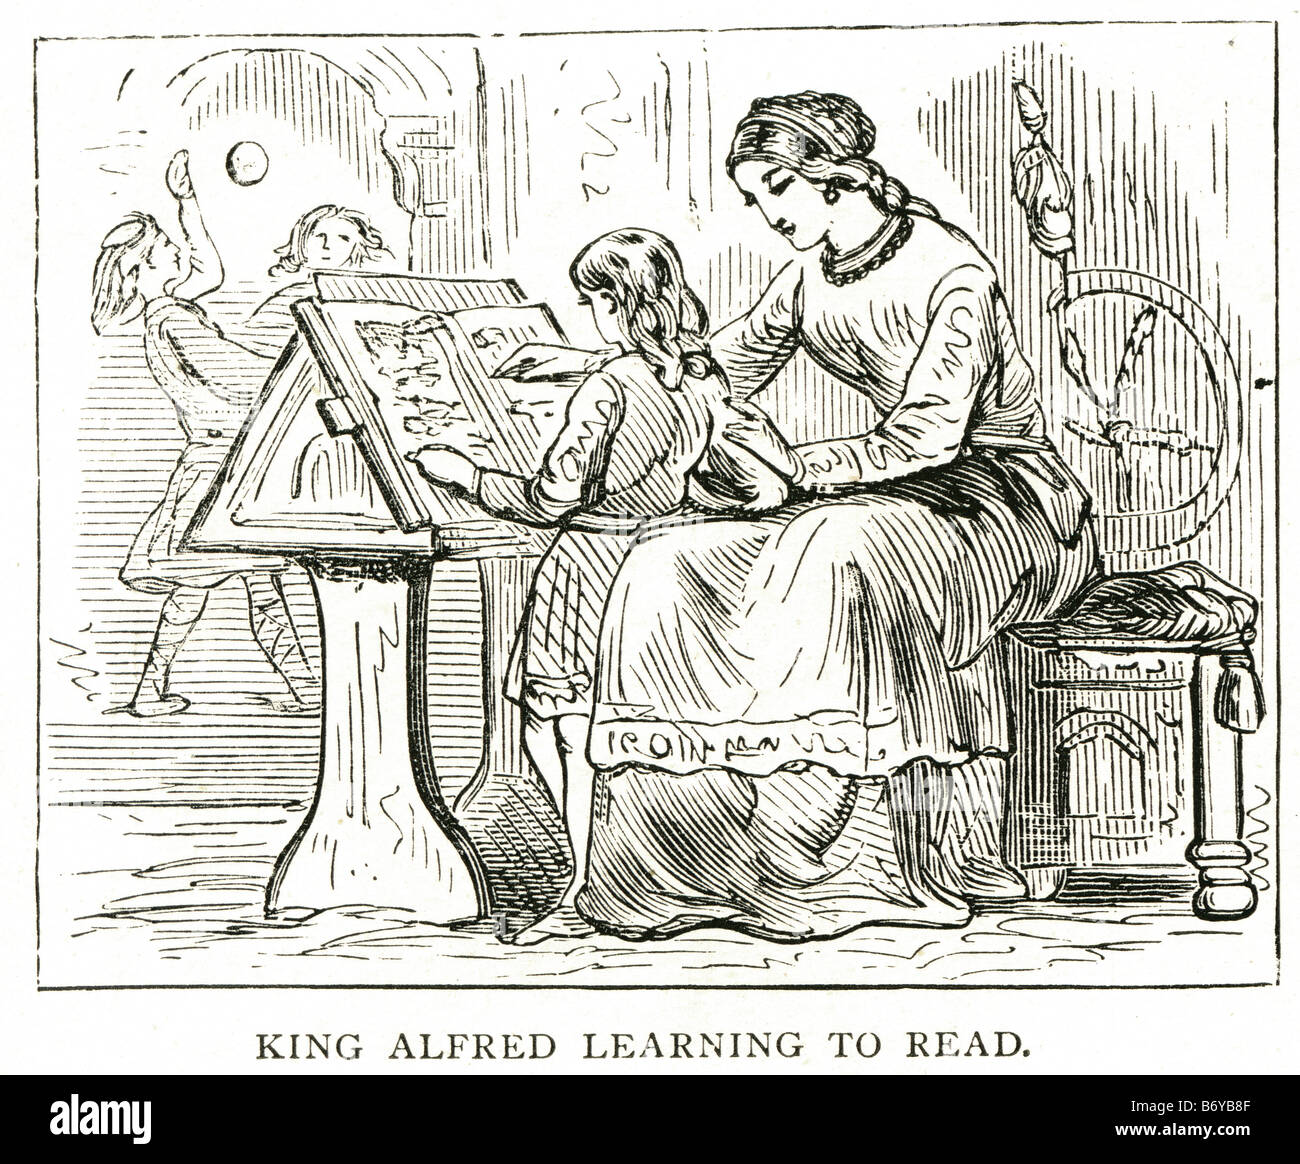 king alfred learning to read Alfred the Great, also spelled Ælfred, was king of the southern Anglo-Saxon kingdom of Wessex from Stock Photo